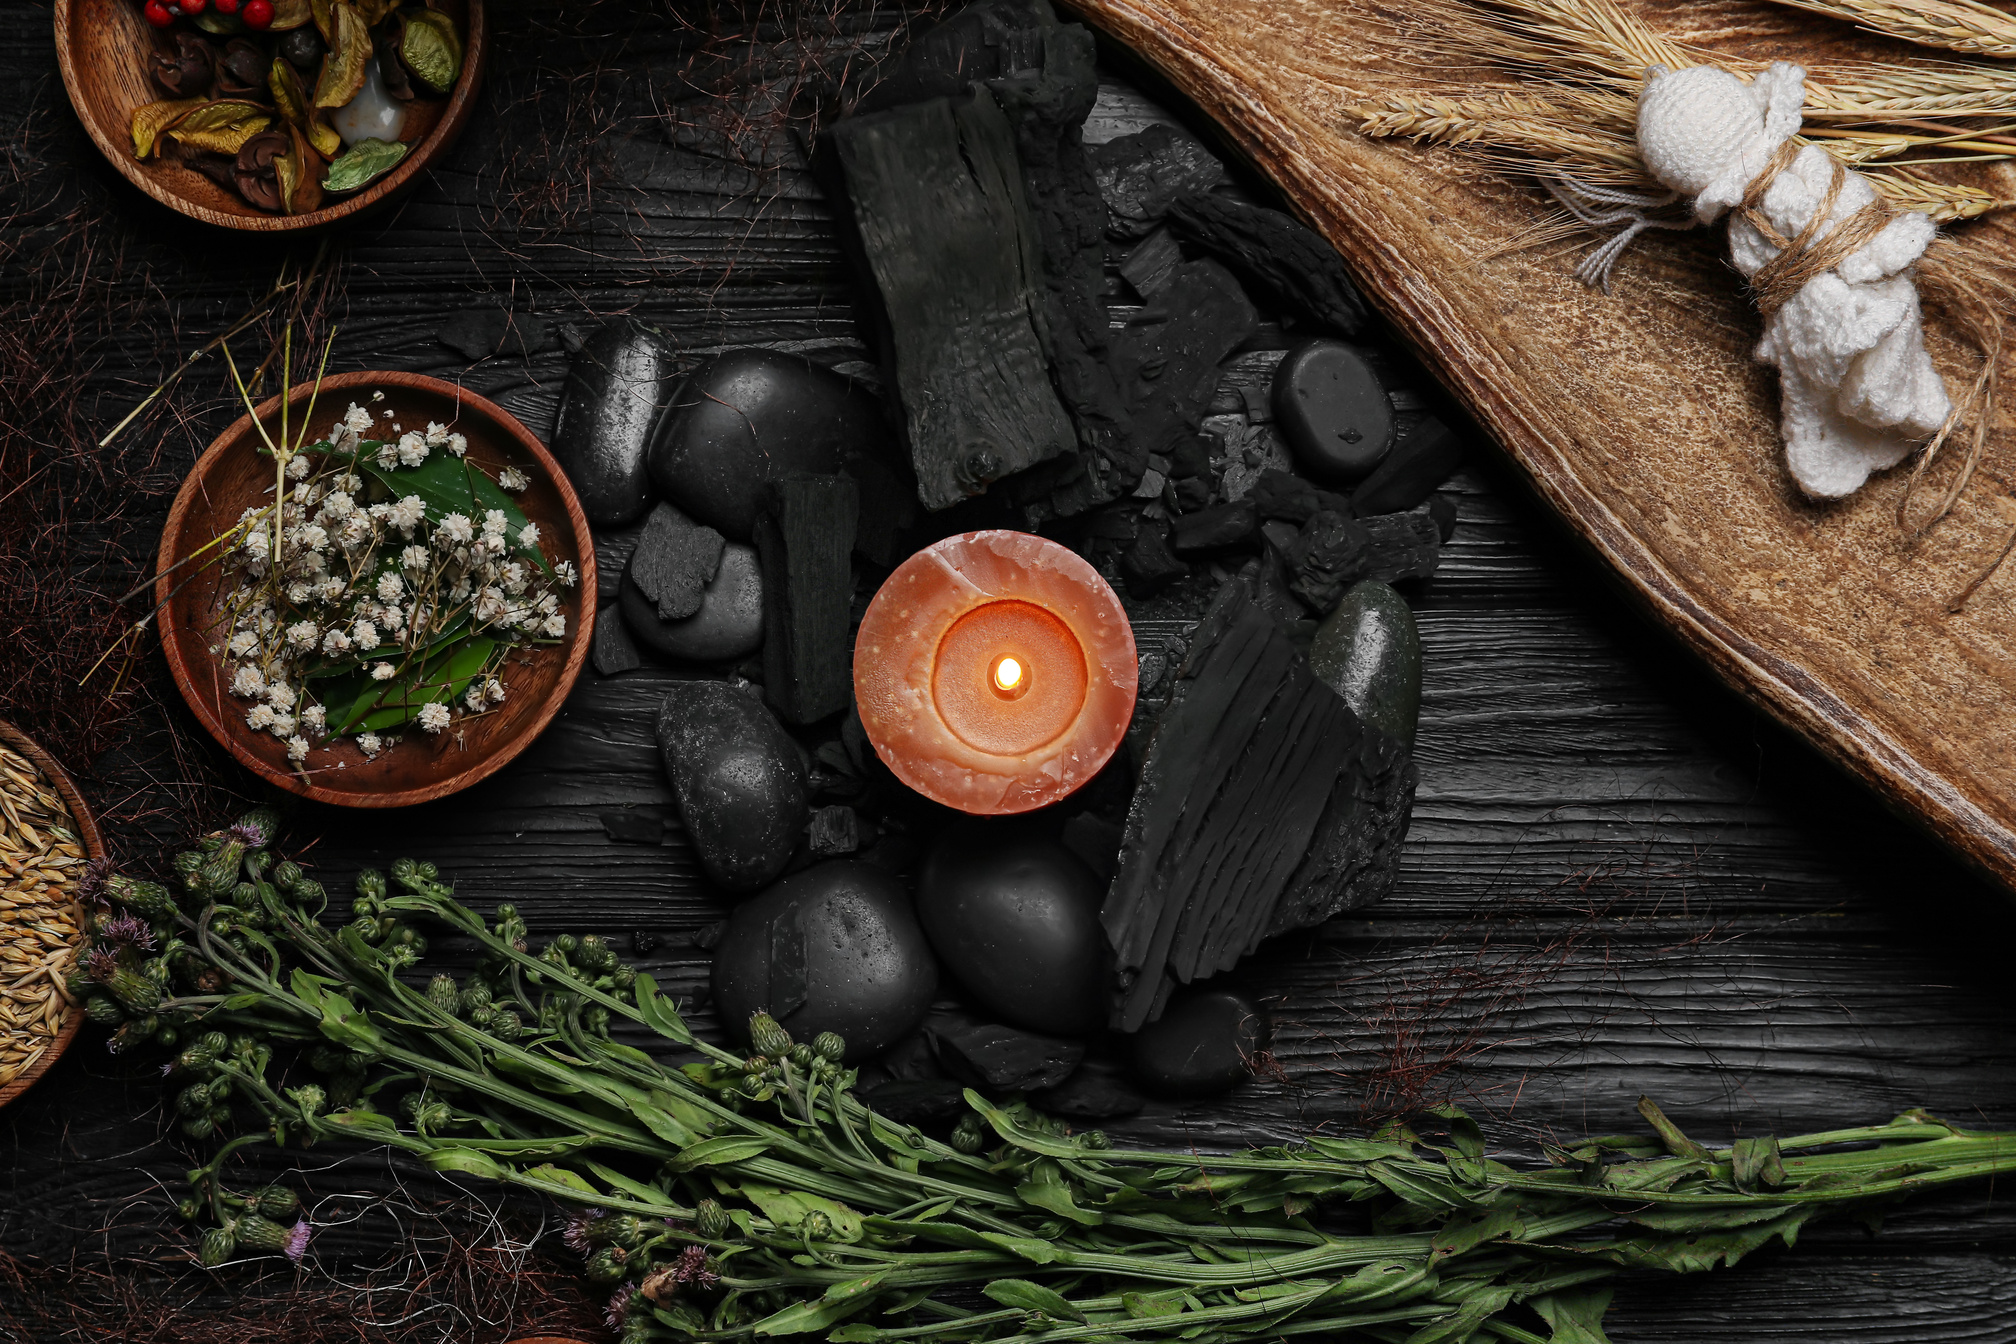 Ingredients for Witch's Ritual on Table